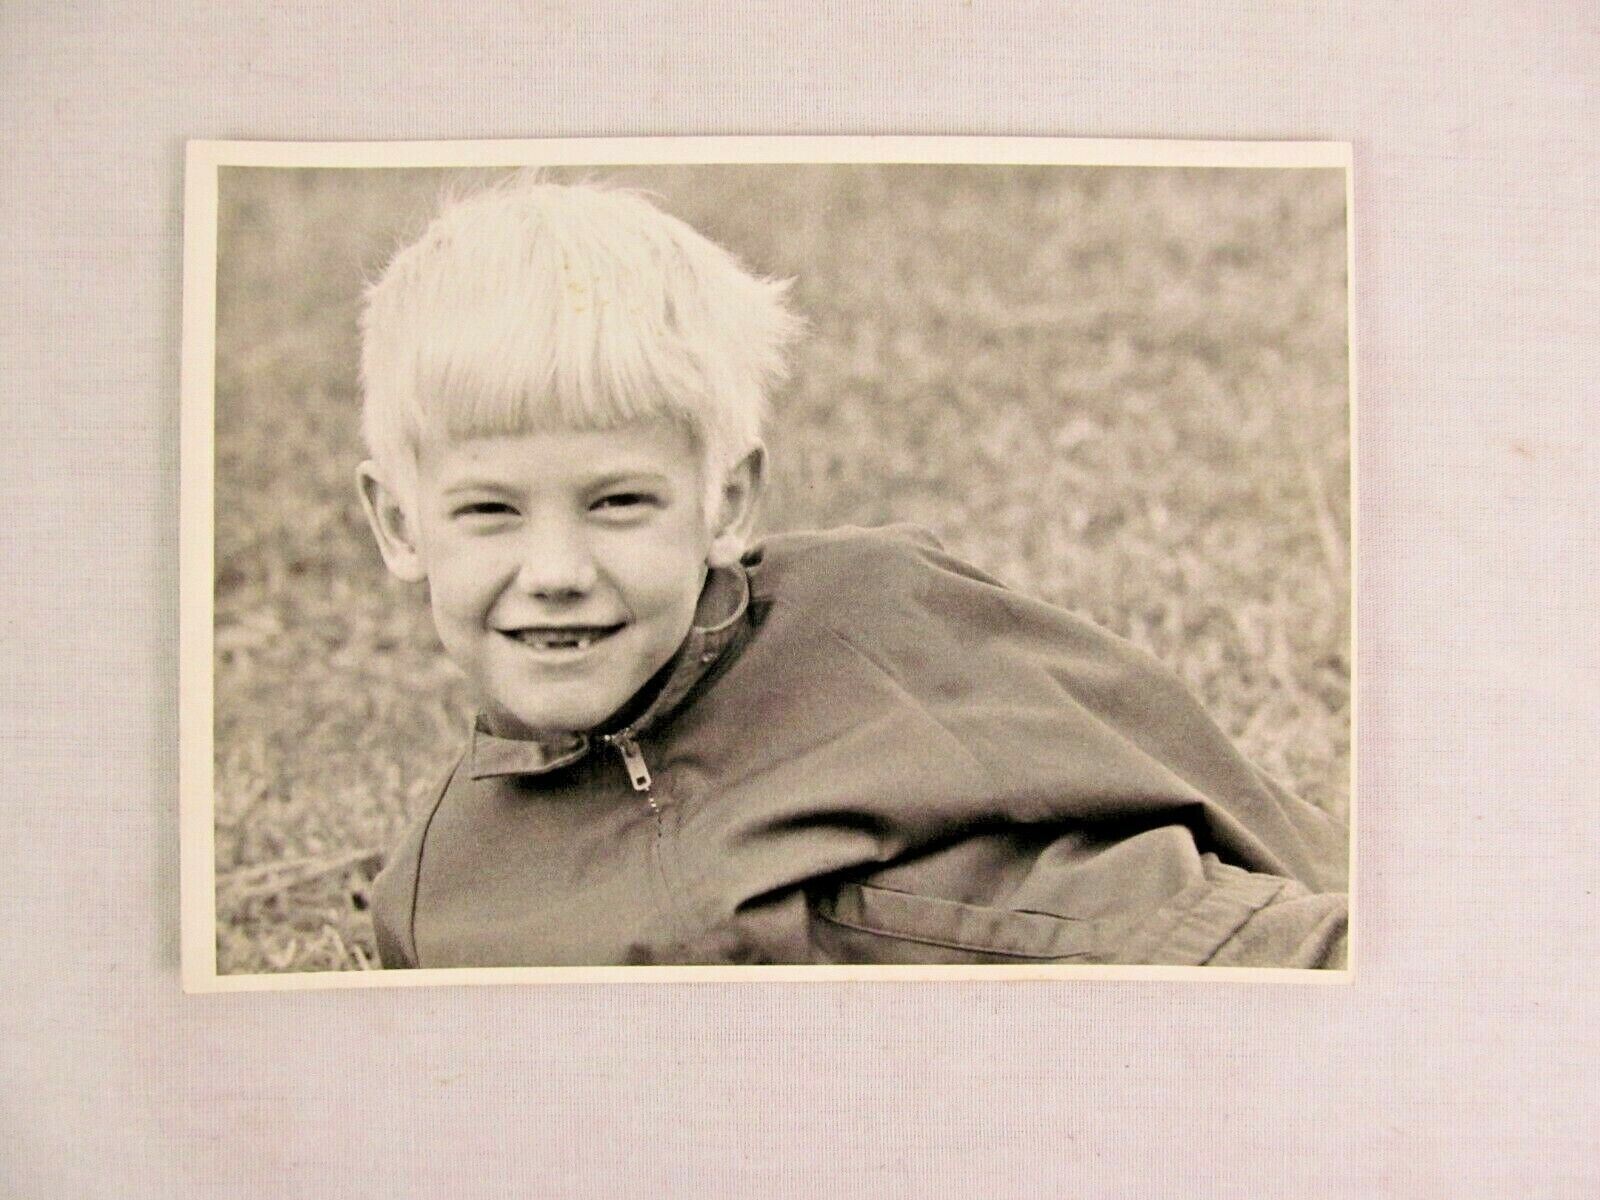 Black & White Photograph Blond Boy Smiling With Missing Teeth B&W 5 x 7